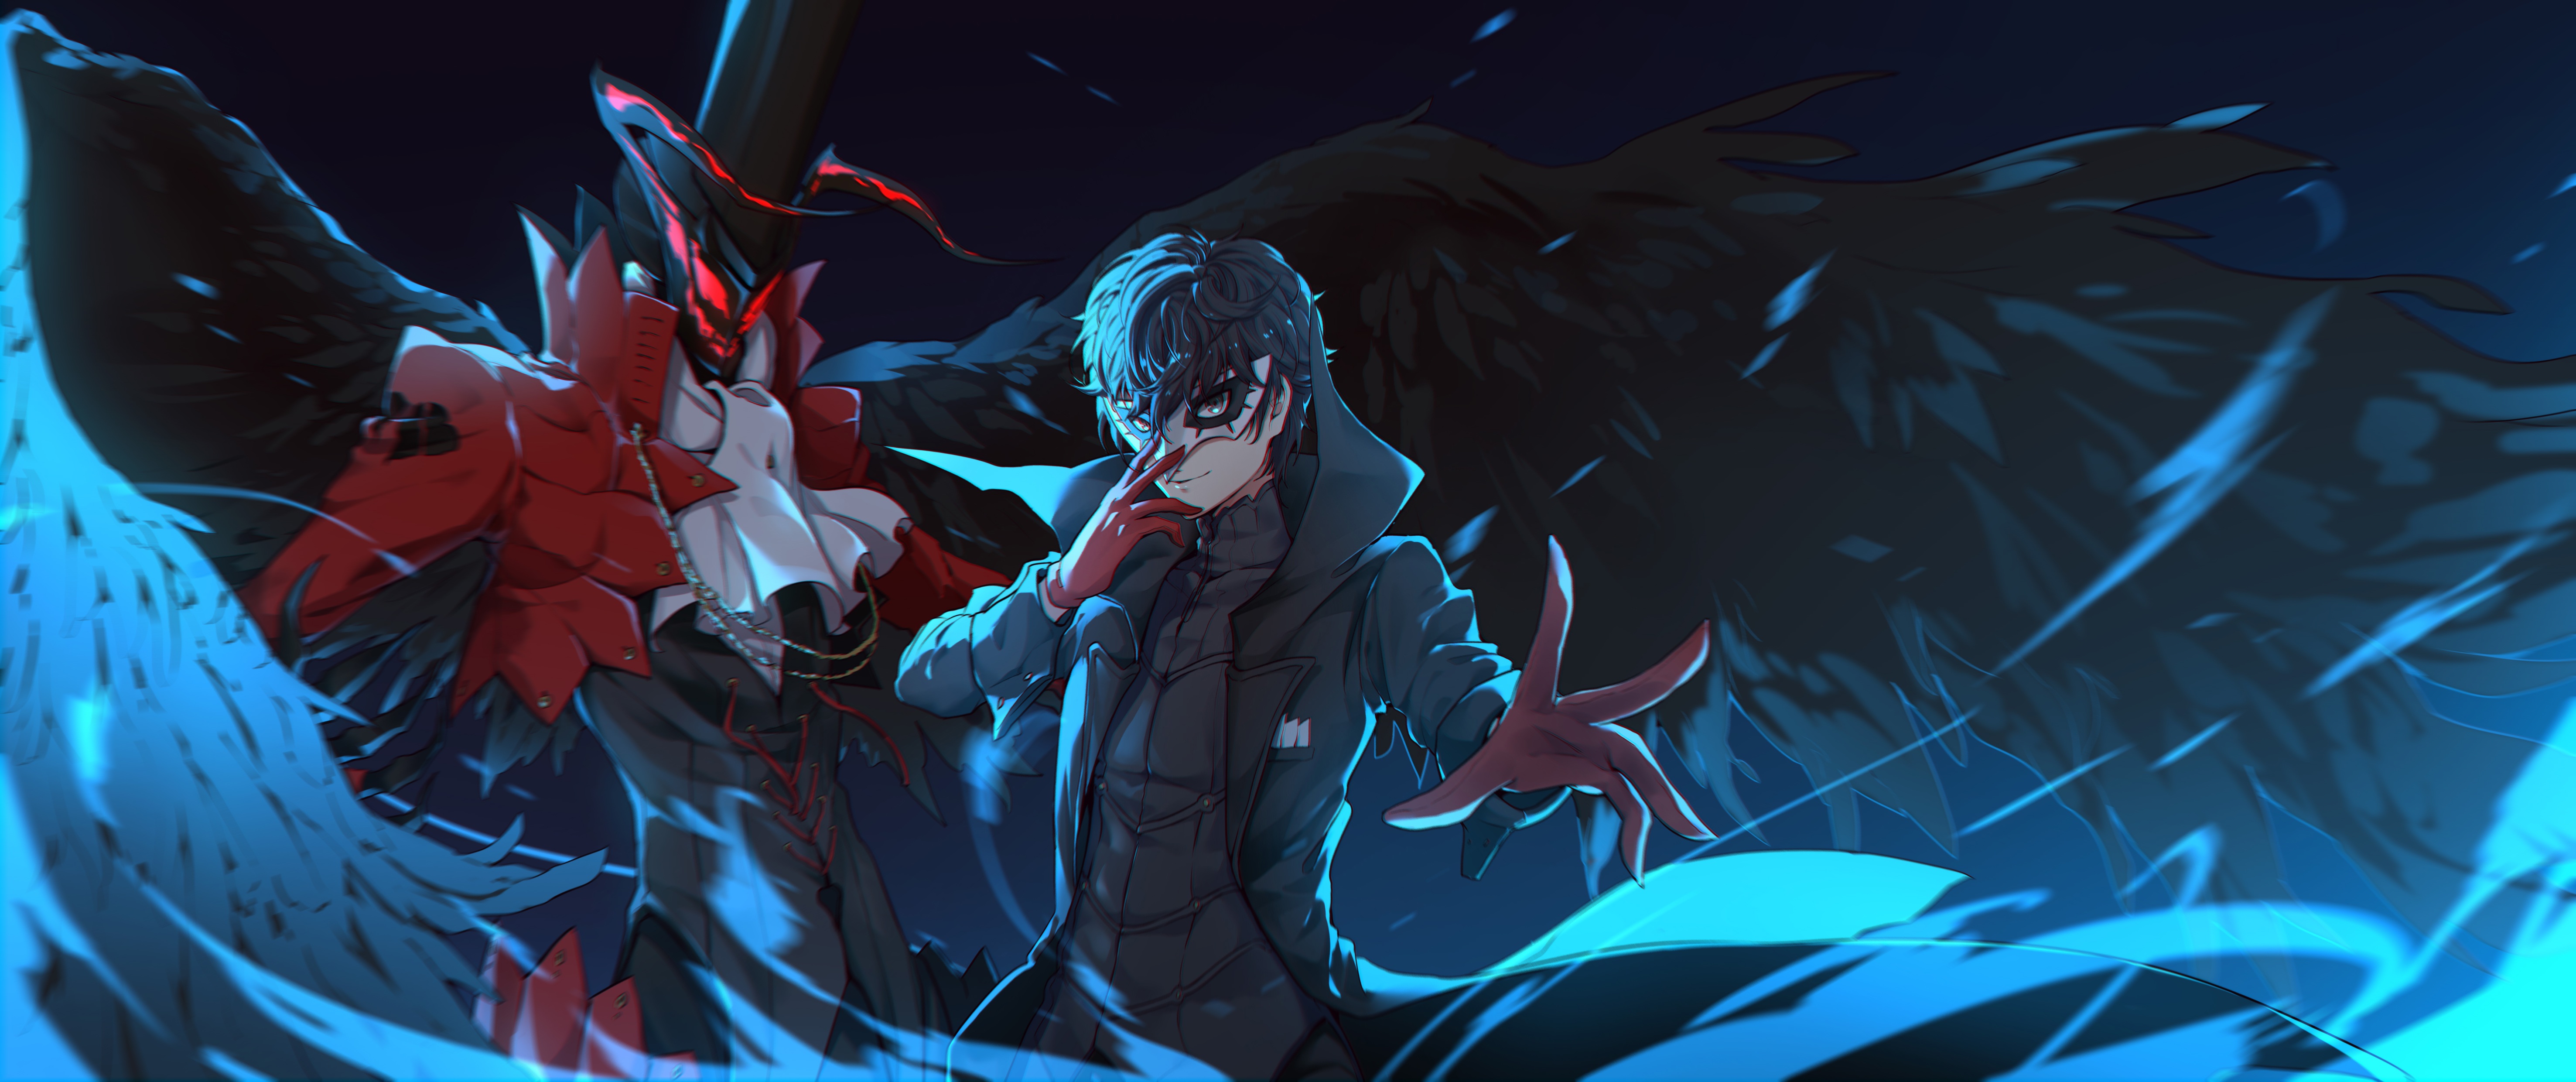 Persona 5: The Animation 4k Ultra HD Wallpaper by Yumuto